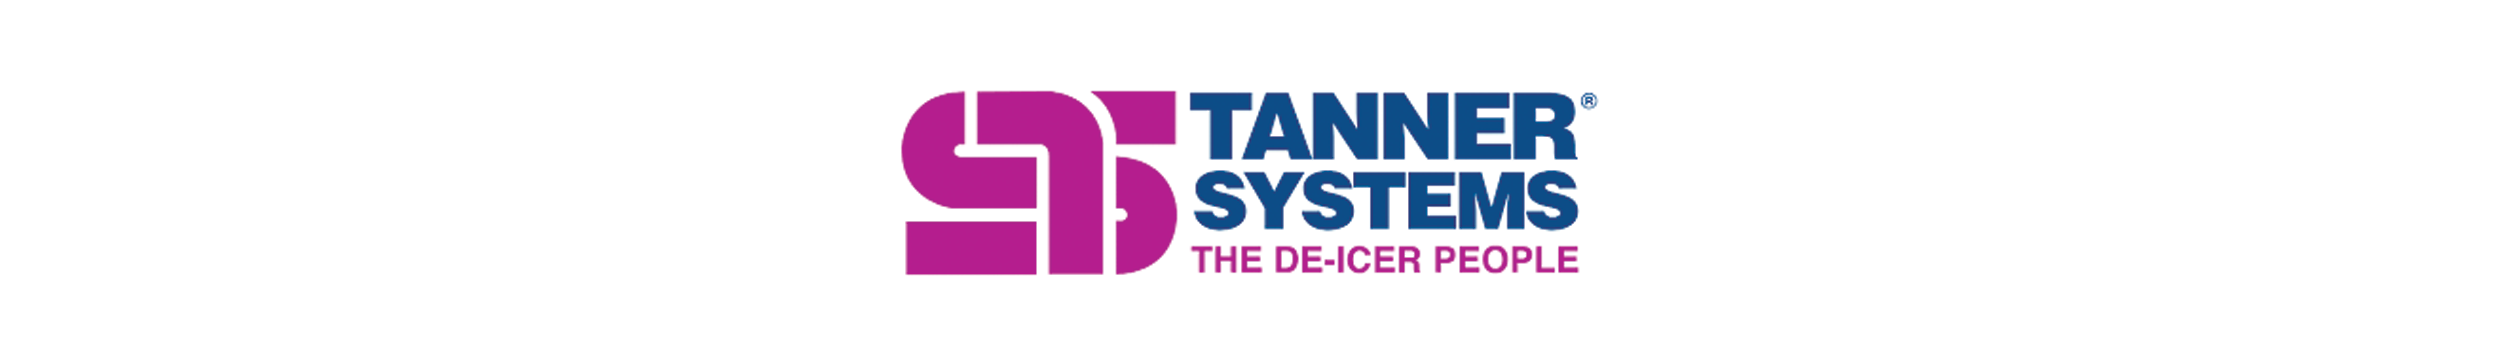 Tanner Systems